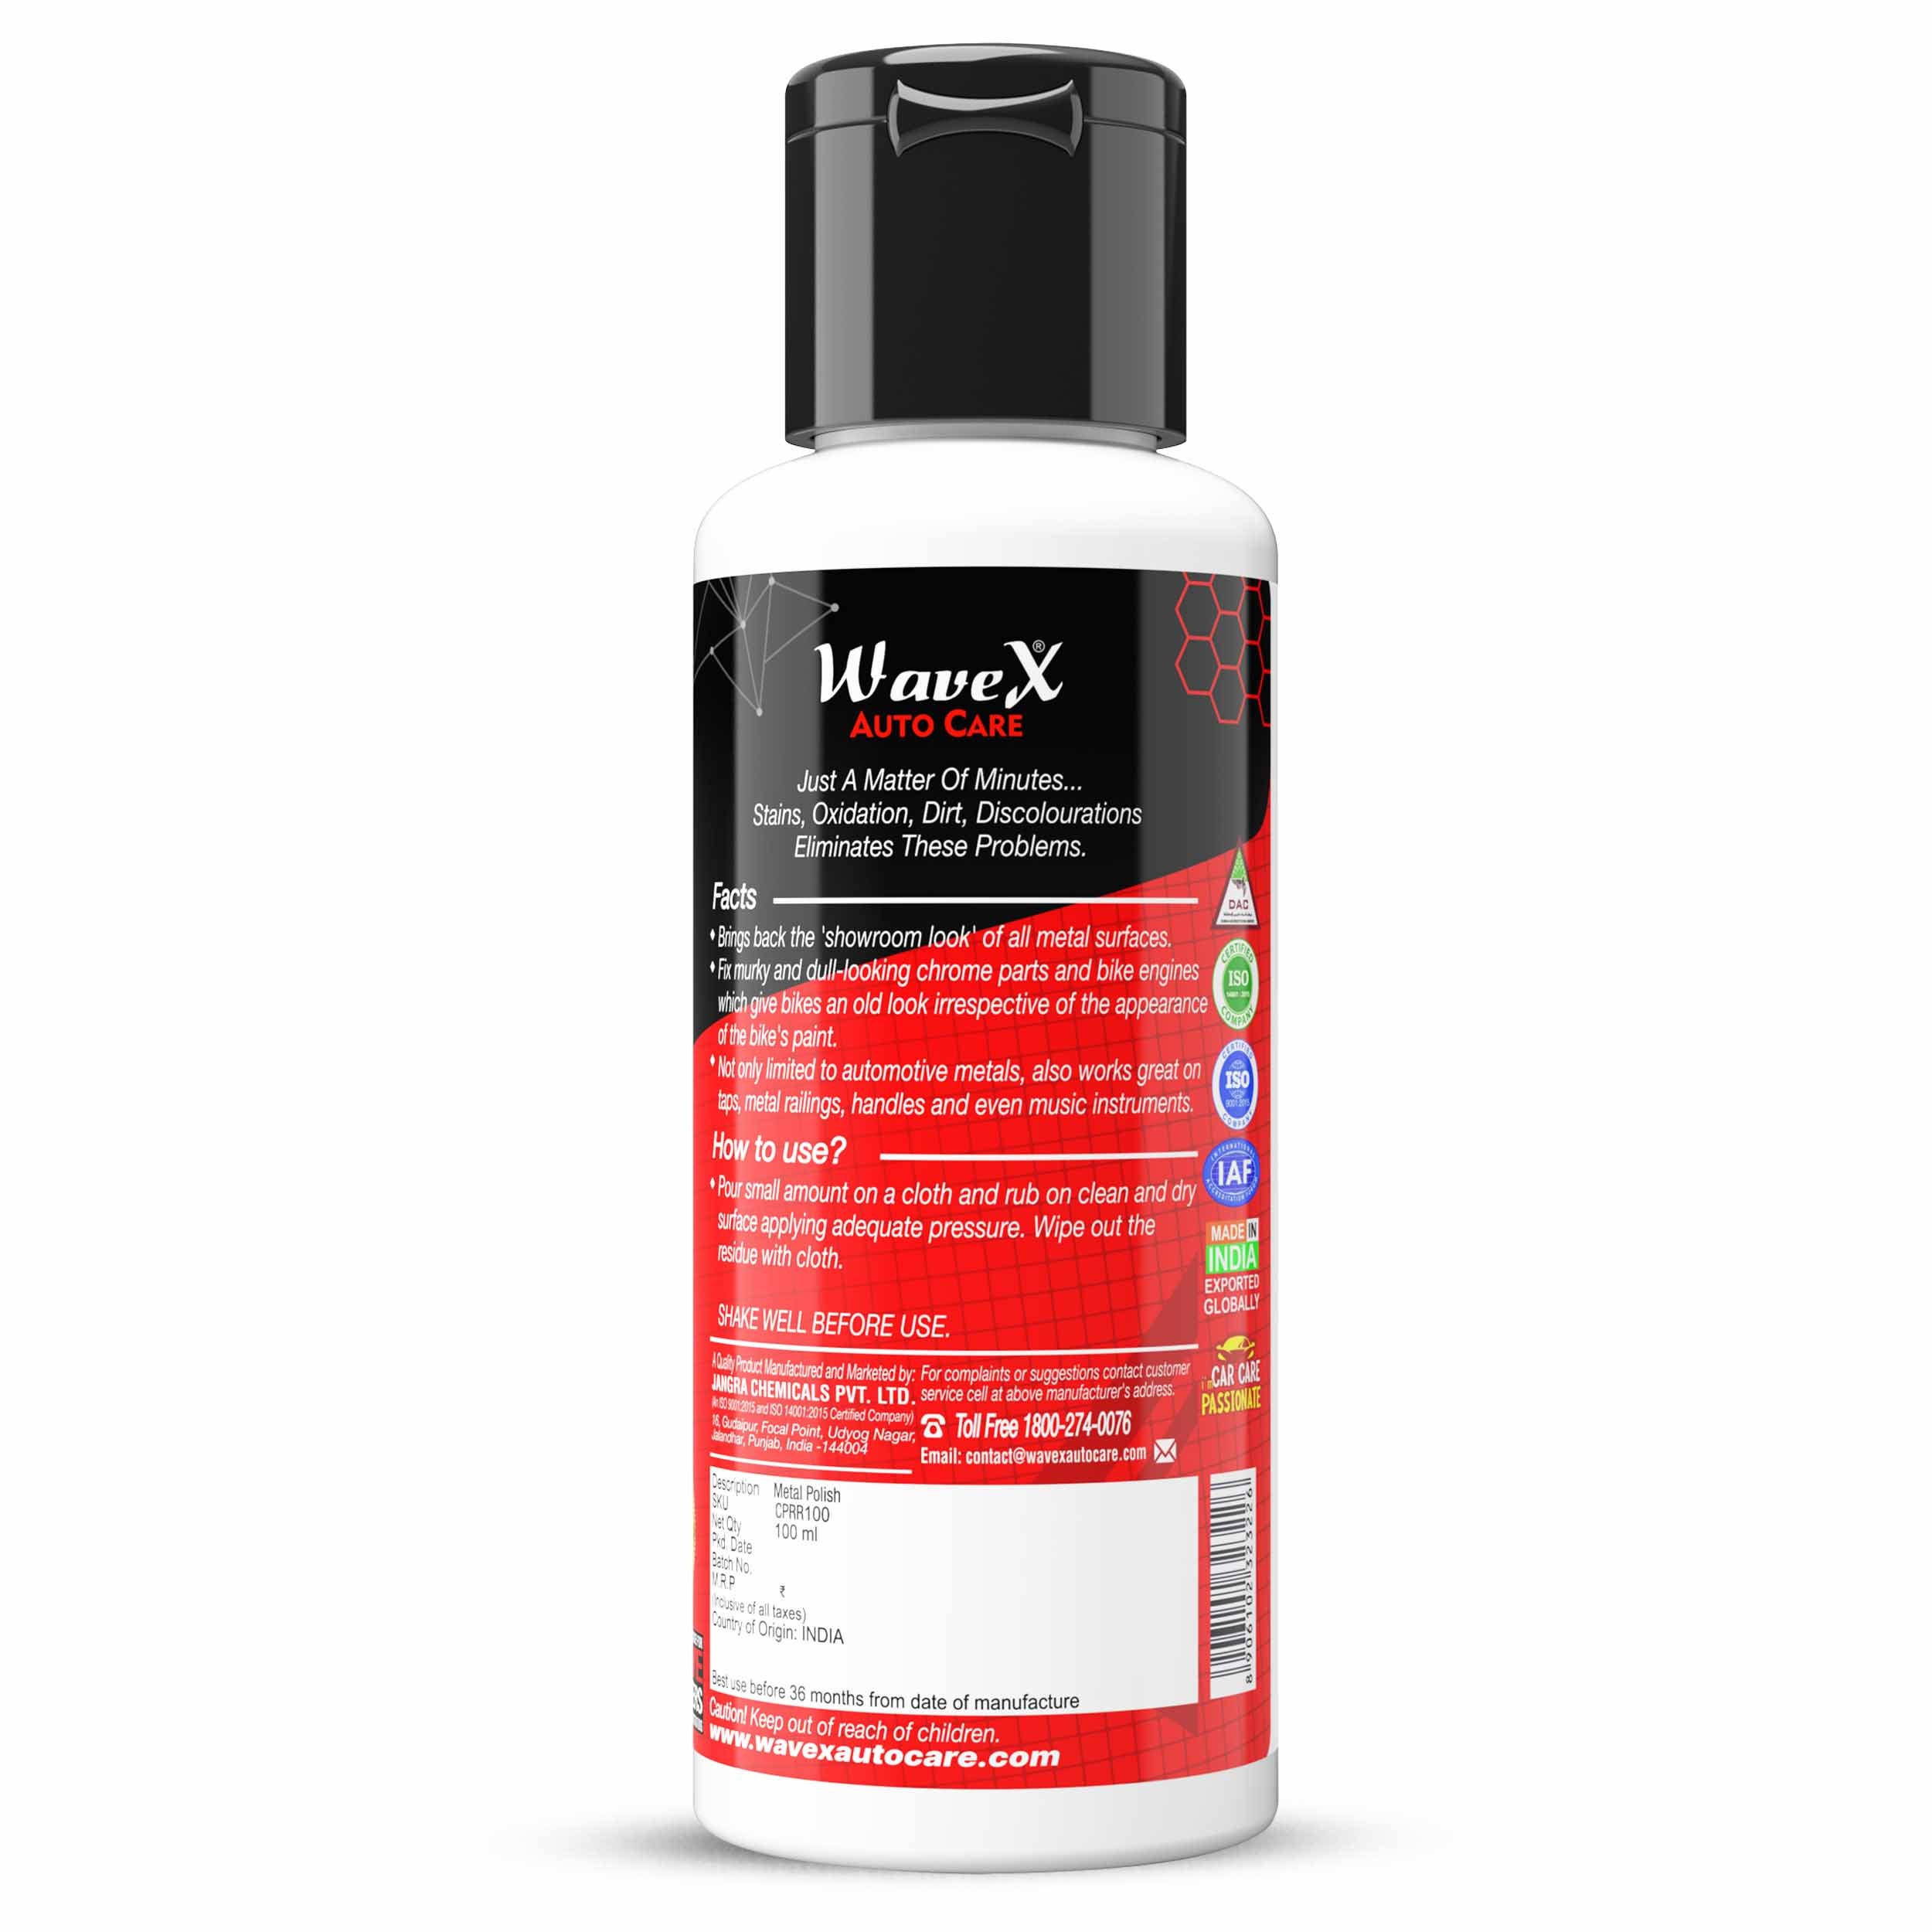 Chrome and Metal Polish 100ml - All Metal Cleaner Chrome, Copper, Brass, Bronze, Gold, Nickel and Stainless Steel, Polisher and Protectant Removes oxidation and discoluoration